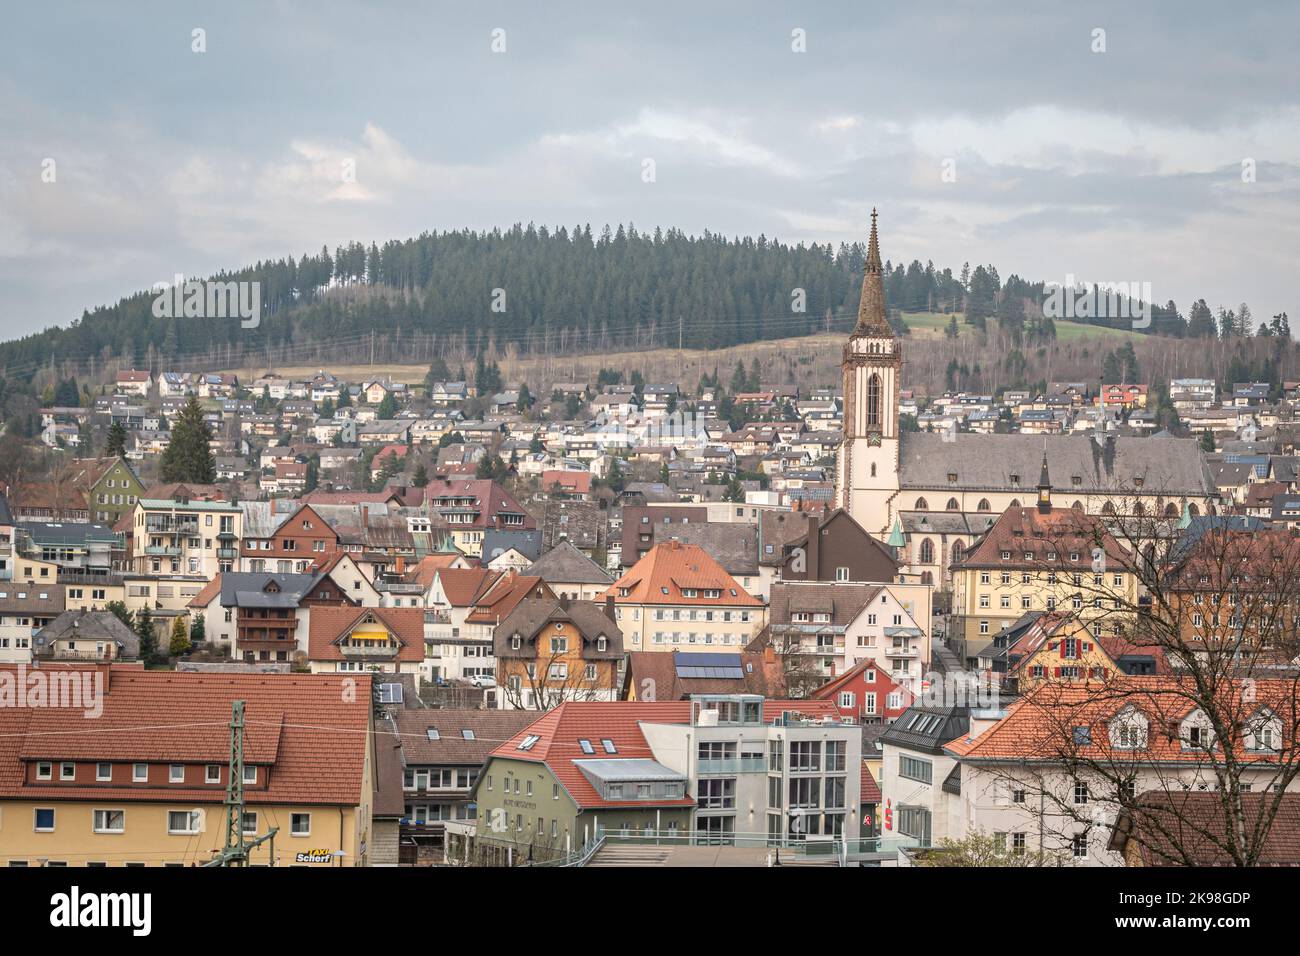 The town of Titisee-Neustadt, Germany, Europe Stock Photo